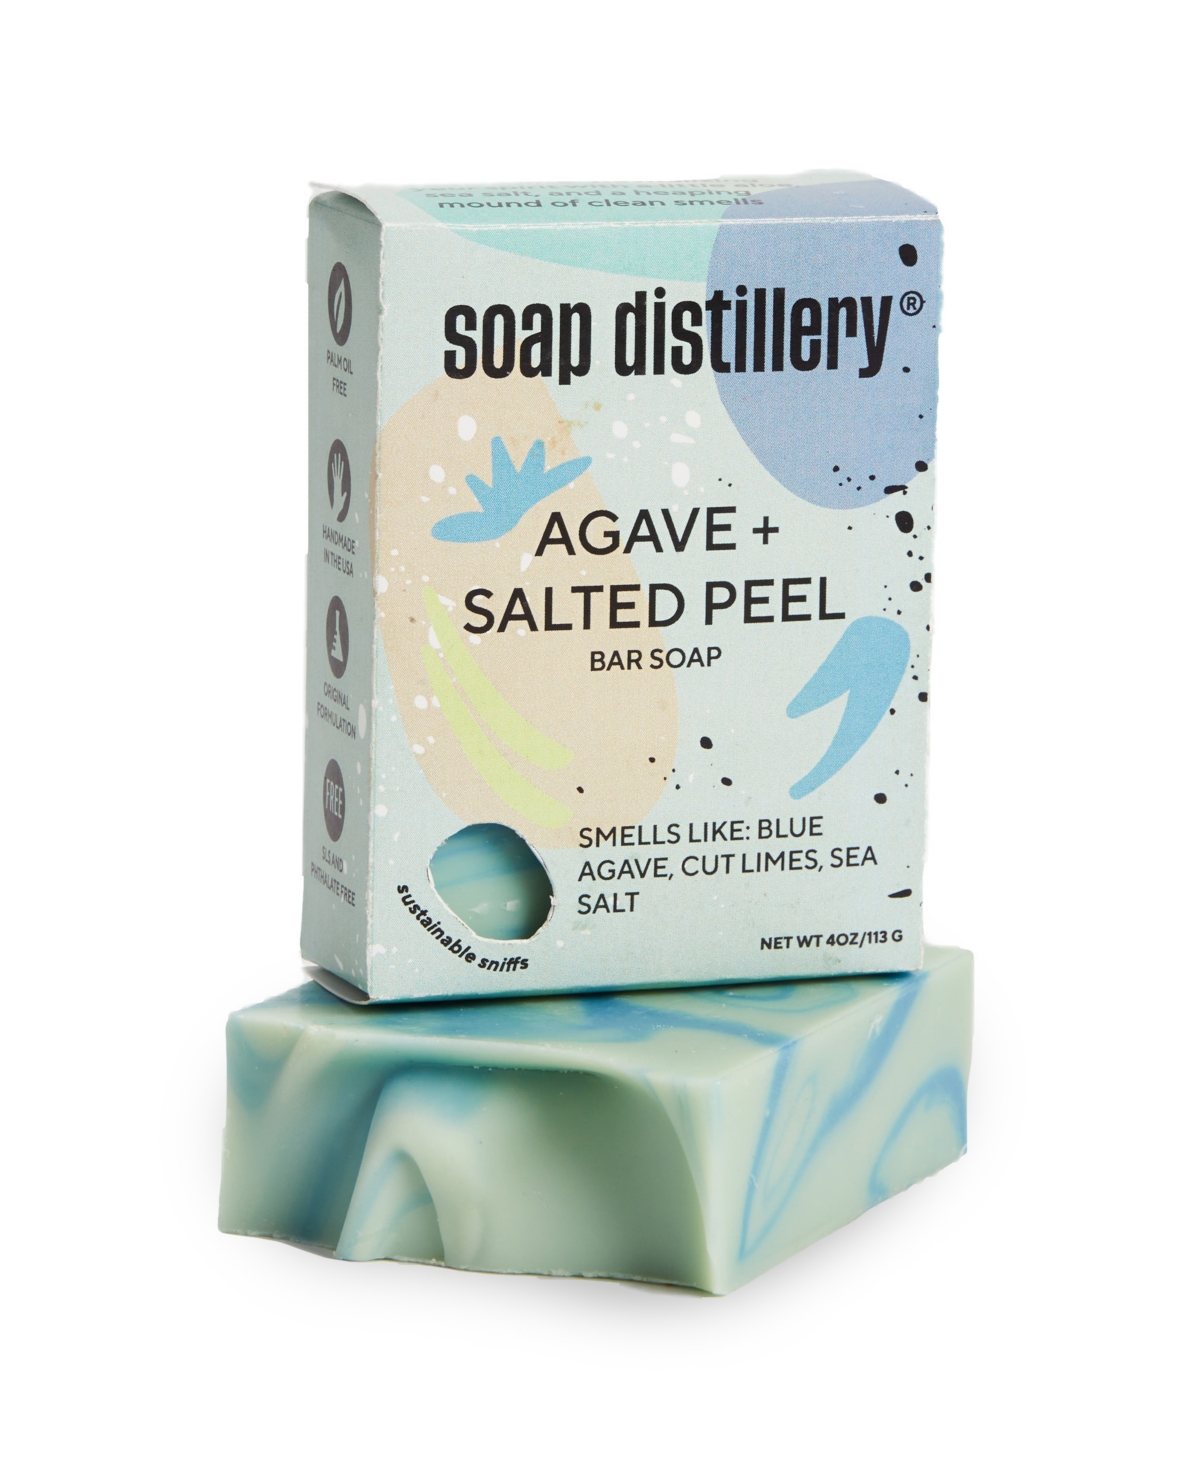 Agave Plus Salted Peel Bar Soap - Green